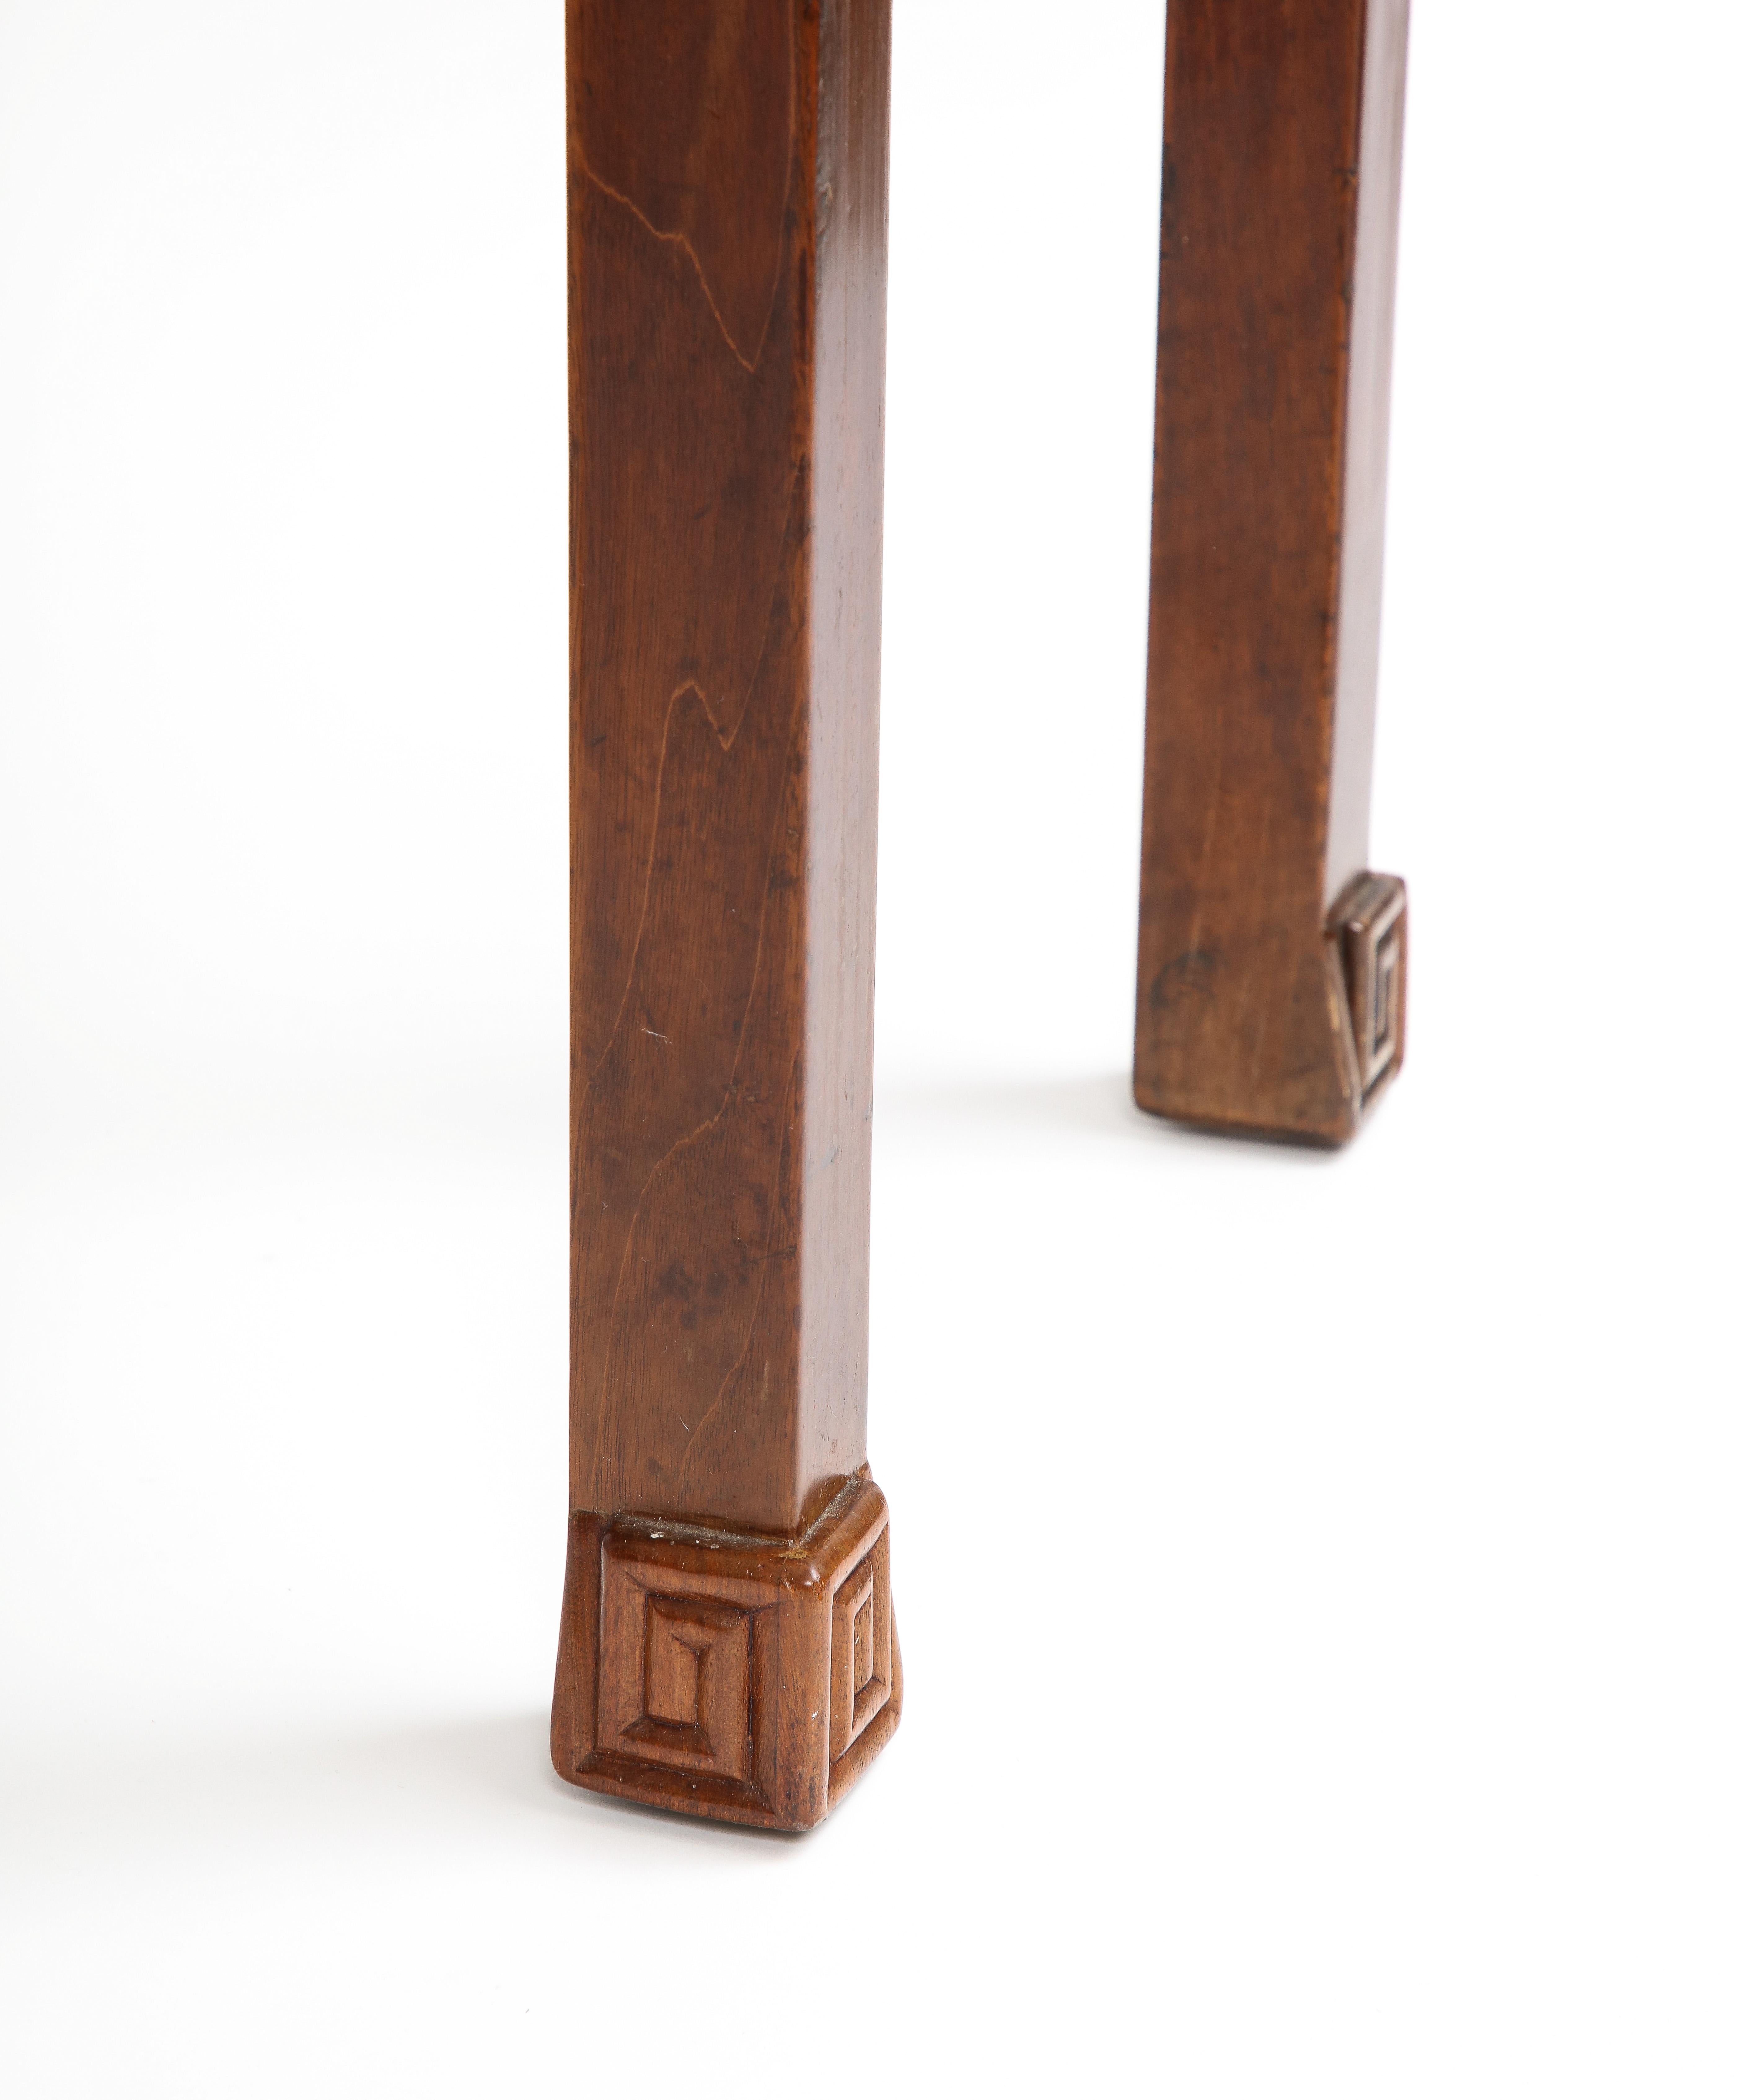 A Pair of 19th Century Qing Dynasty Chinese Carved Hardwood Pedestals For Sale 12